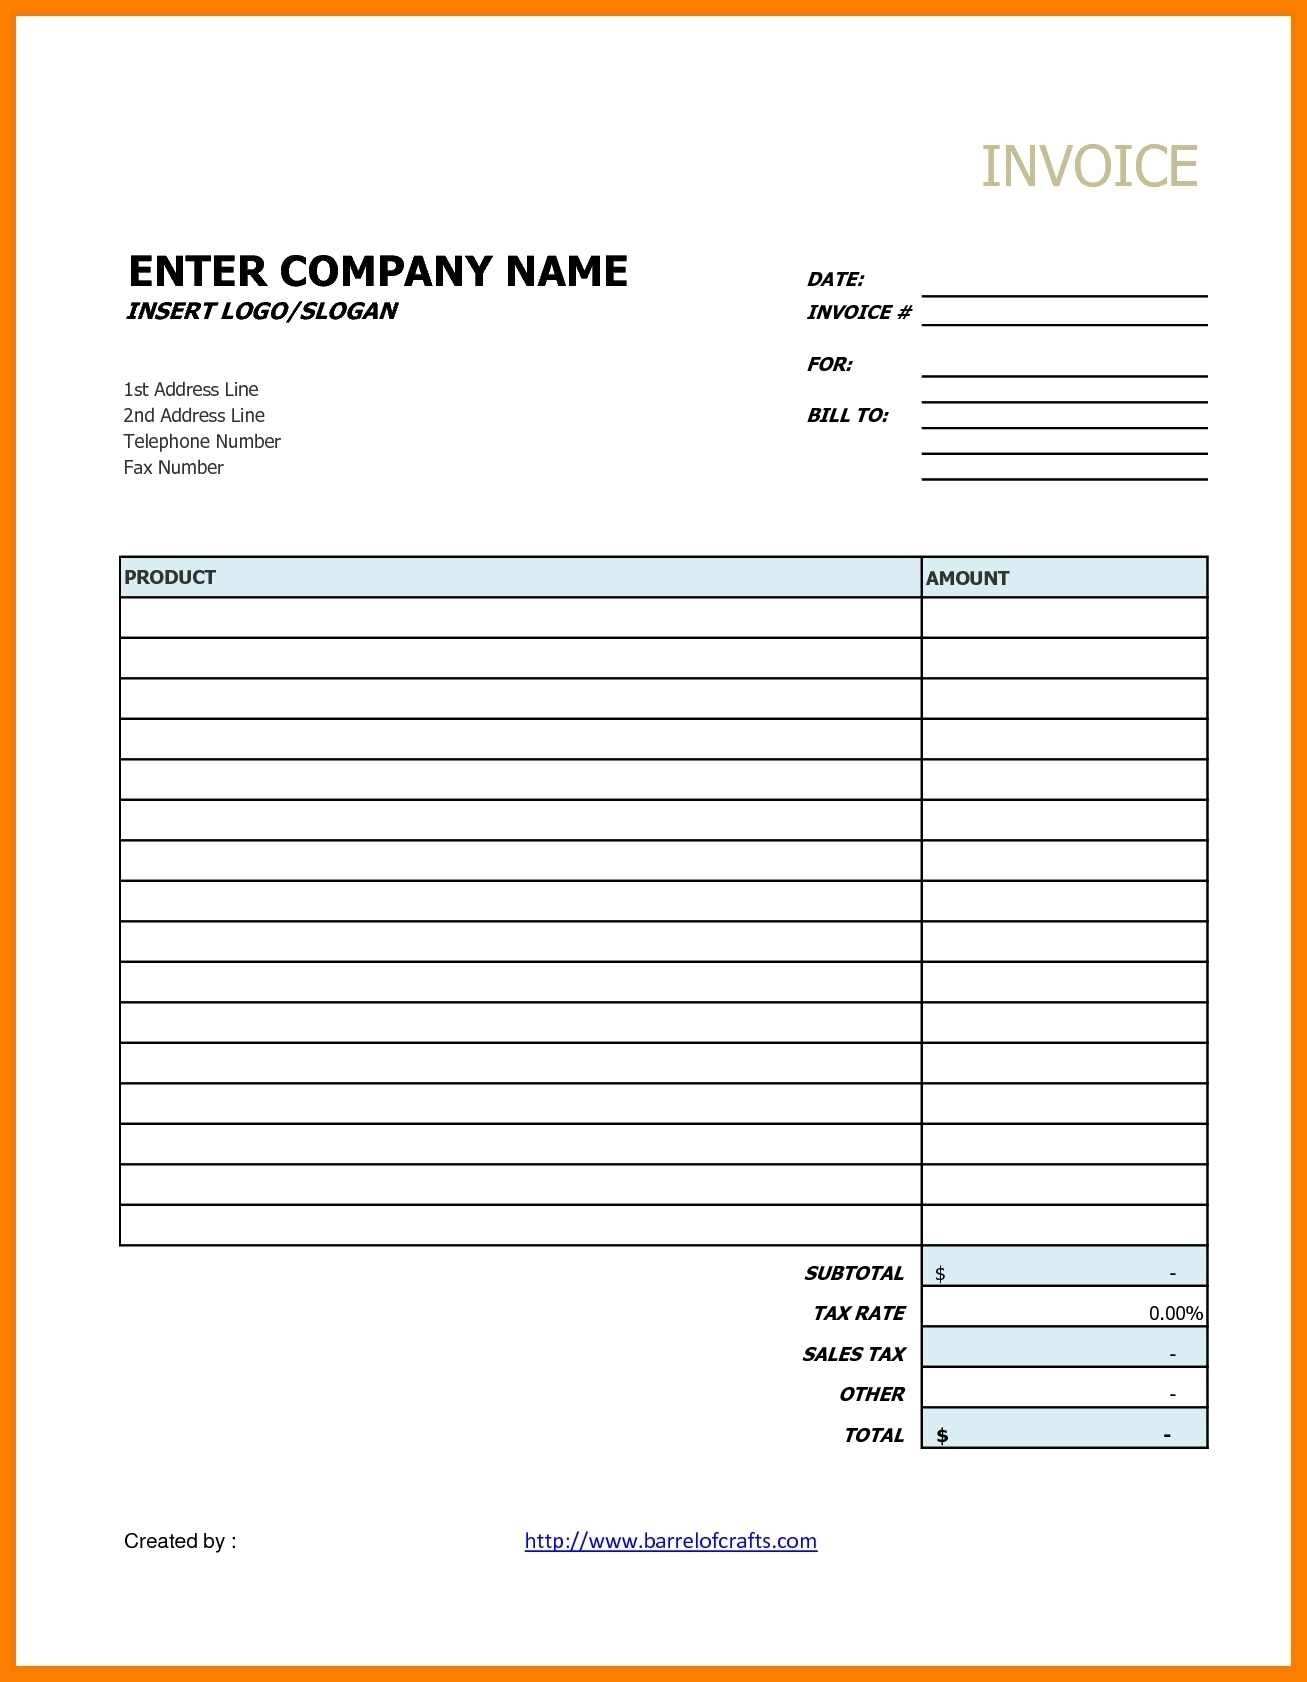 blank-invoice-template-mt-home-arts